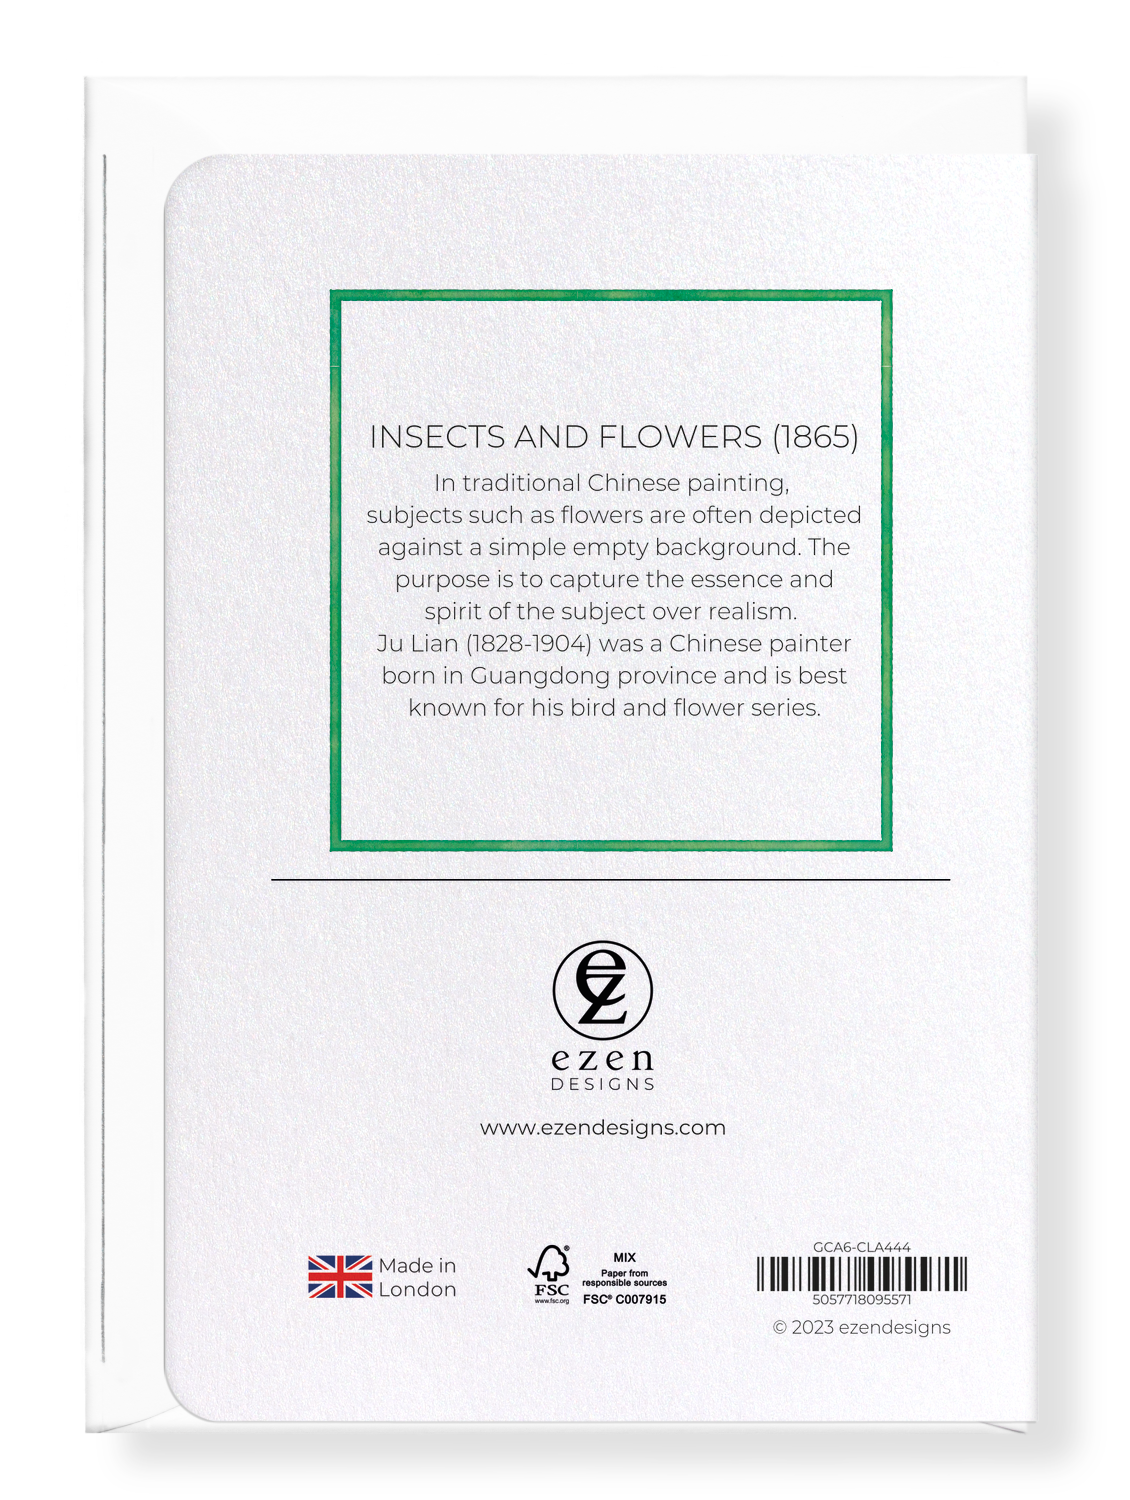 Ezen Designs - Insects and Flowers (1865) - Greeting Card - Back